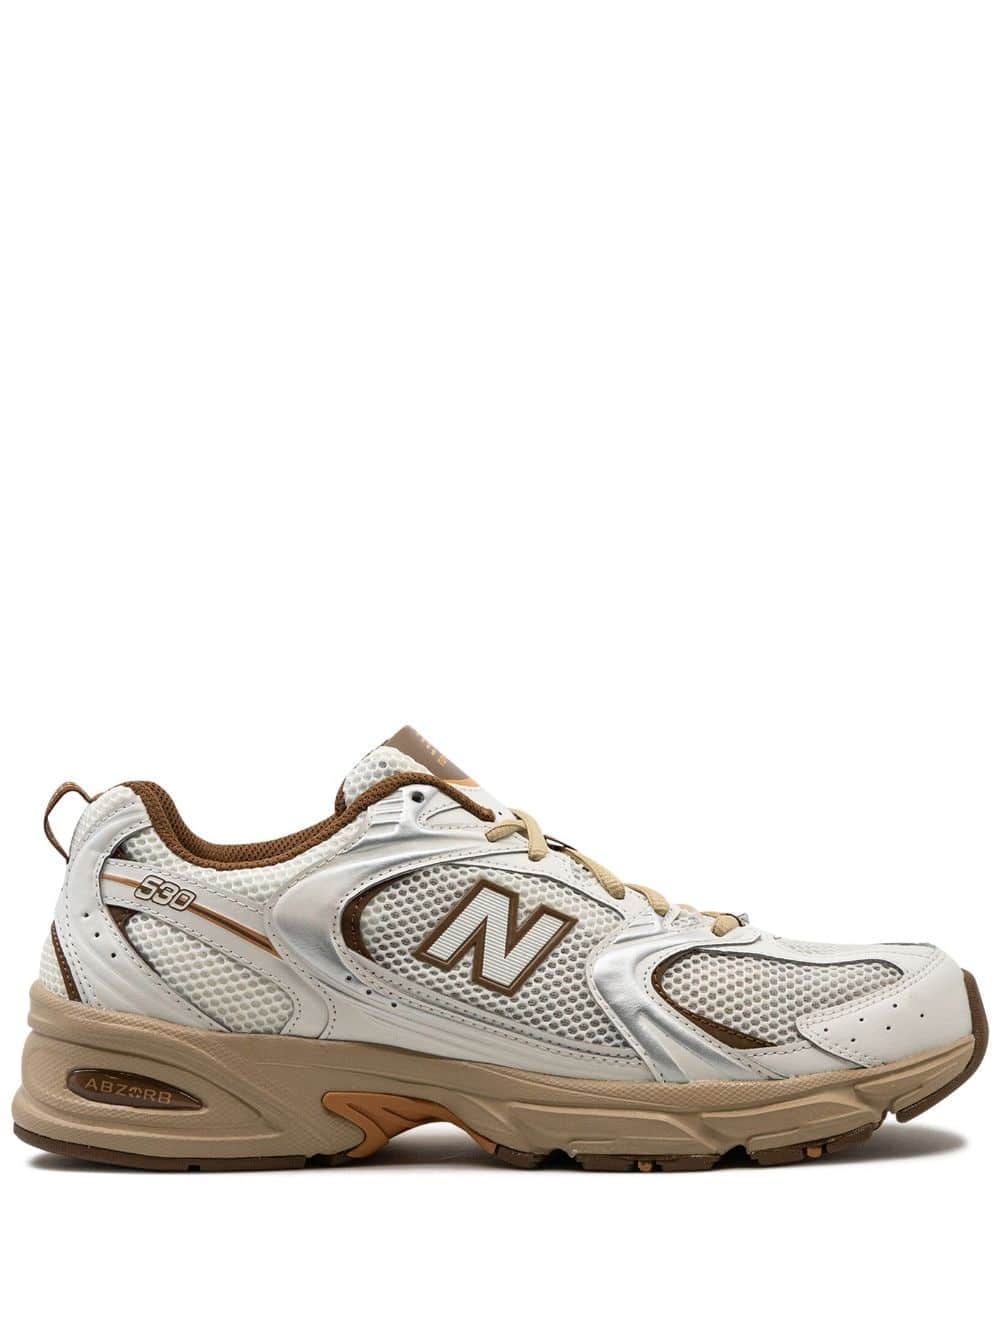 New Balance 530 "Off-White/Brown" sneakers - Beige